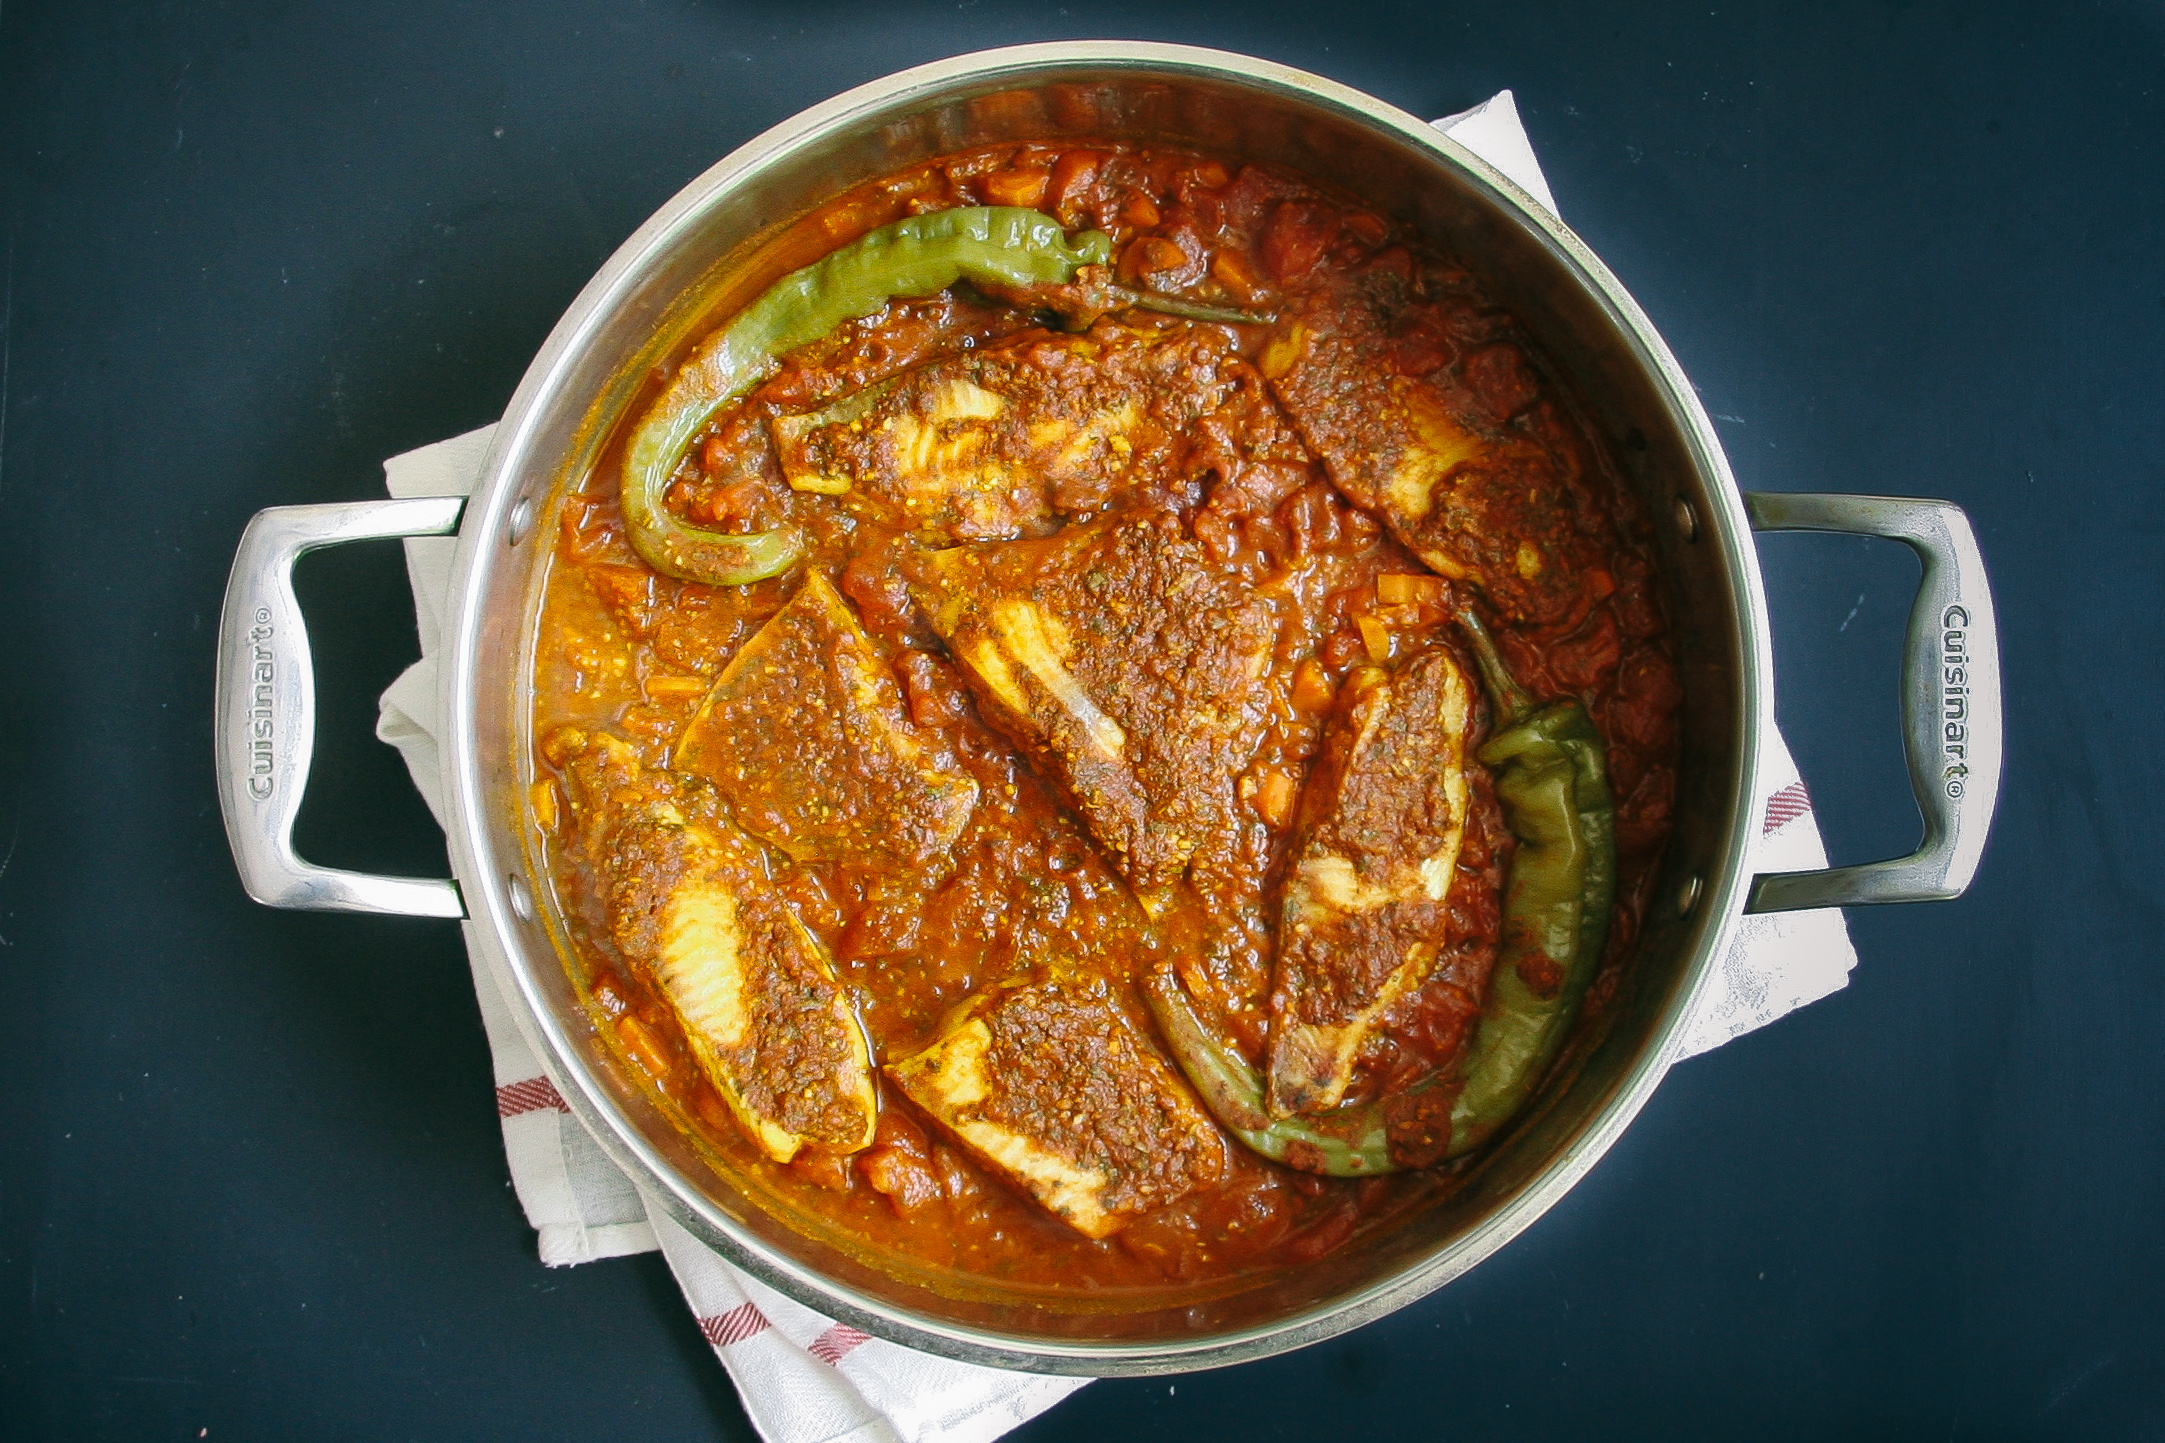 Spicy Moroccan Fish in a Tomato Sauce | I Will Not Eat Oysters